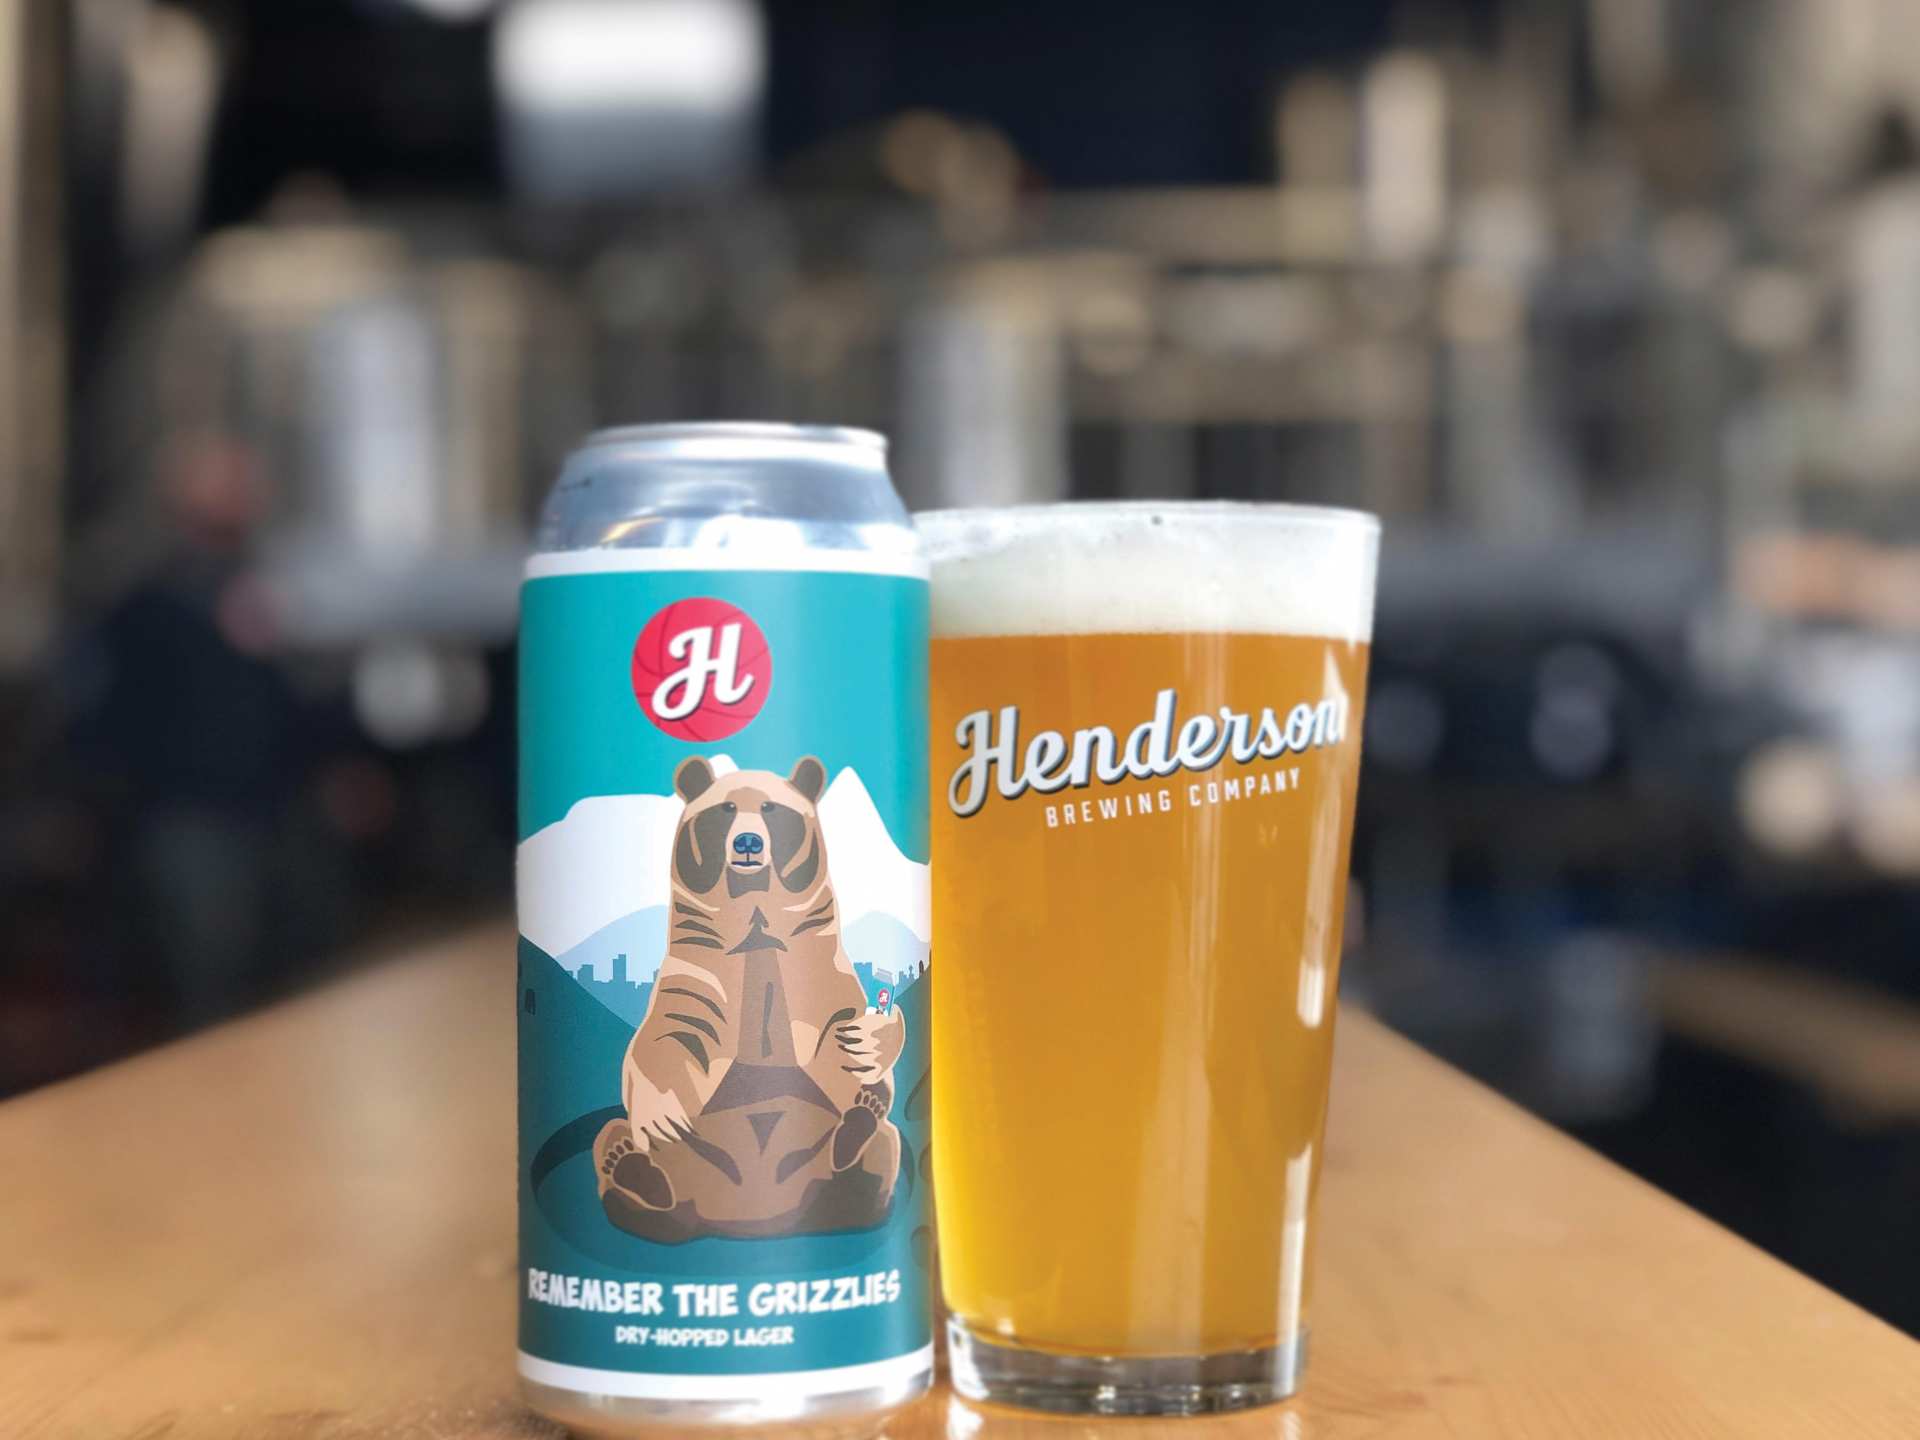 Best breweries in Toronto | A can and pint of beer from Henderson Brewing Co.